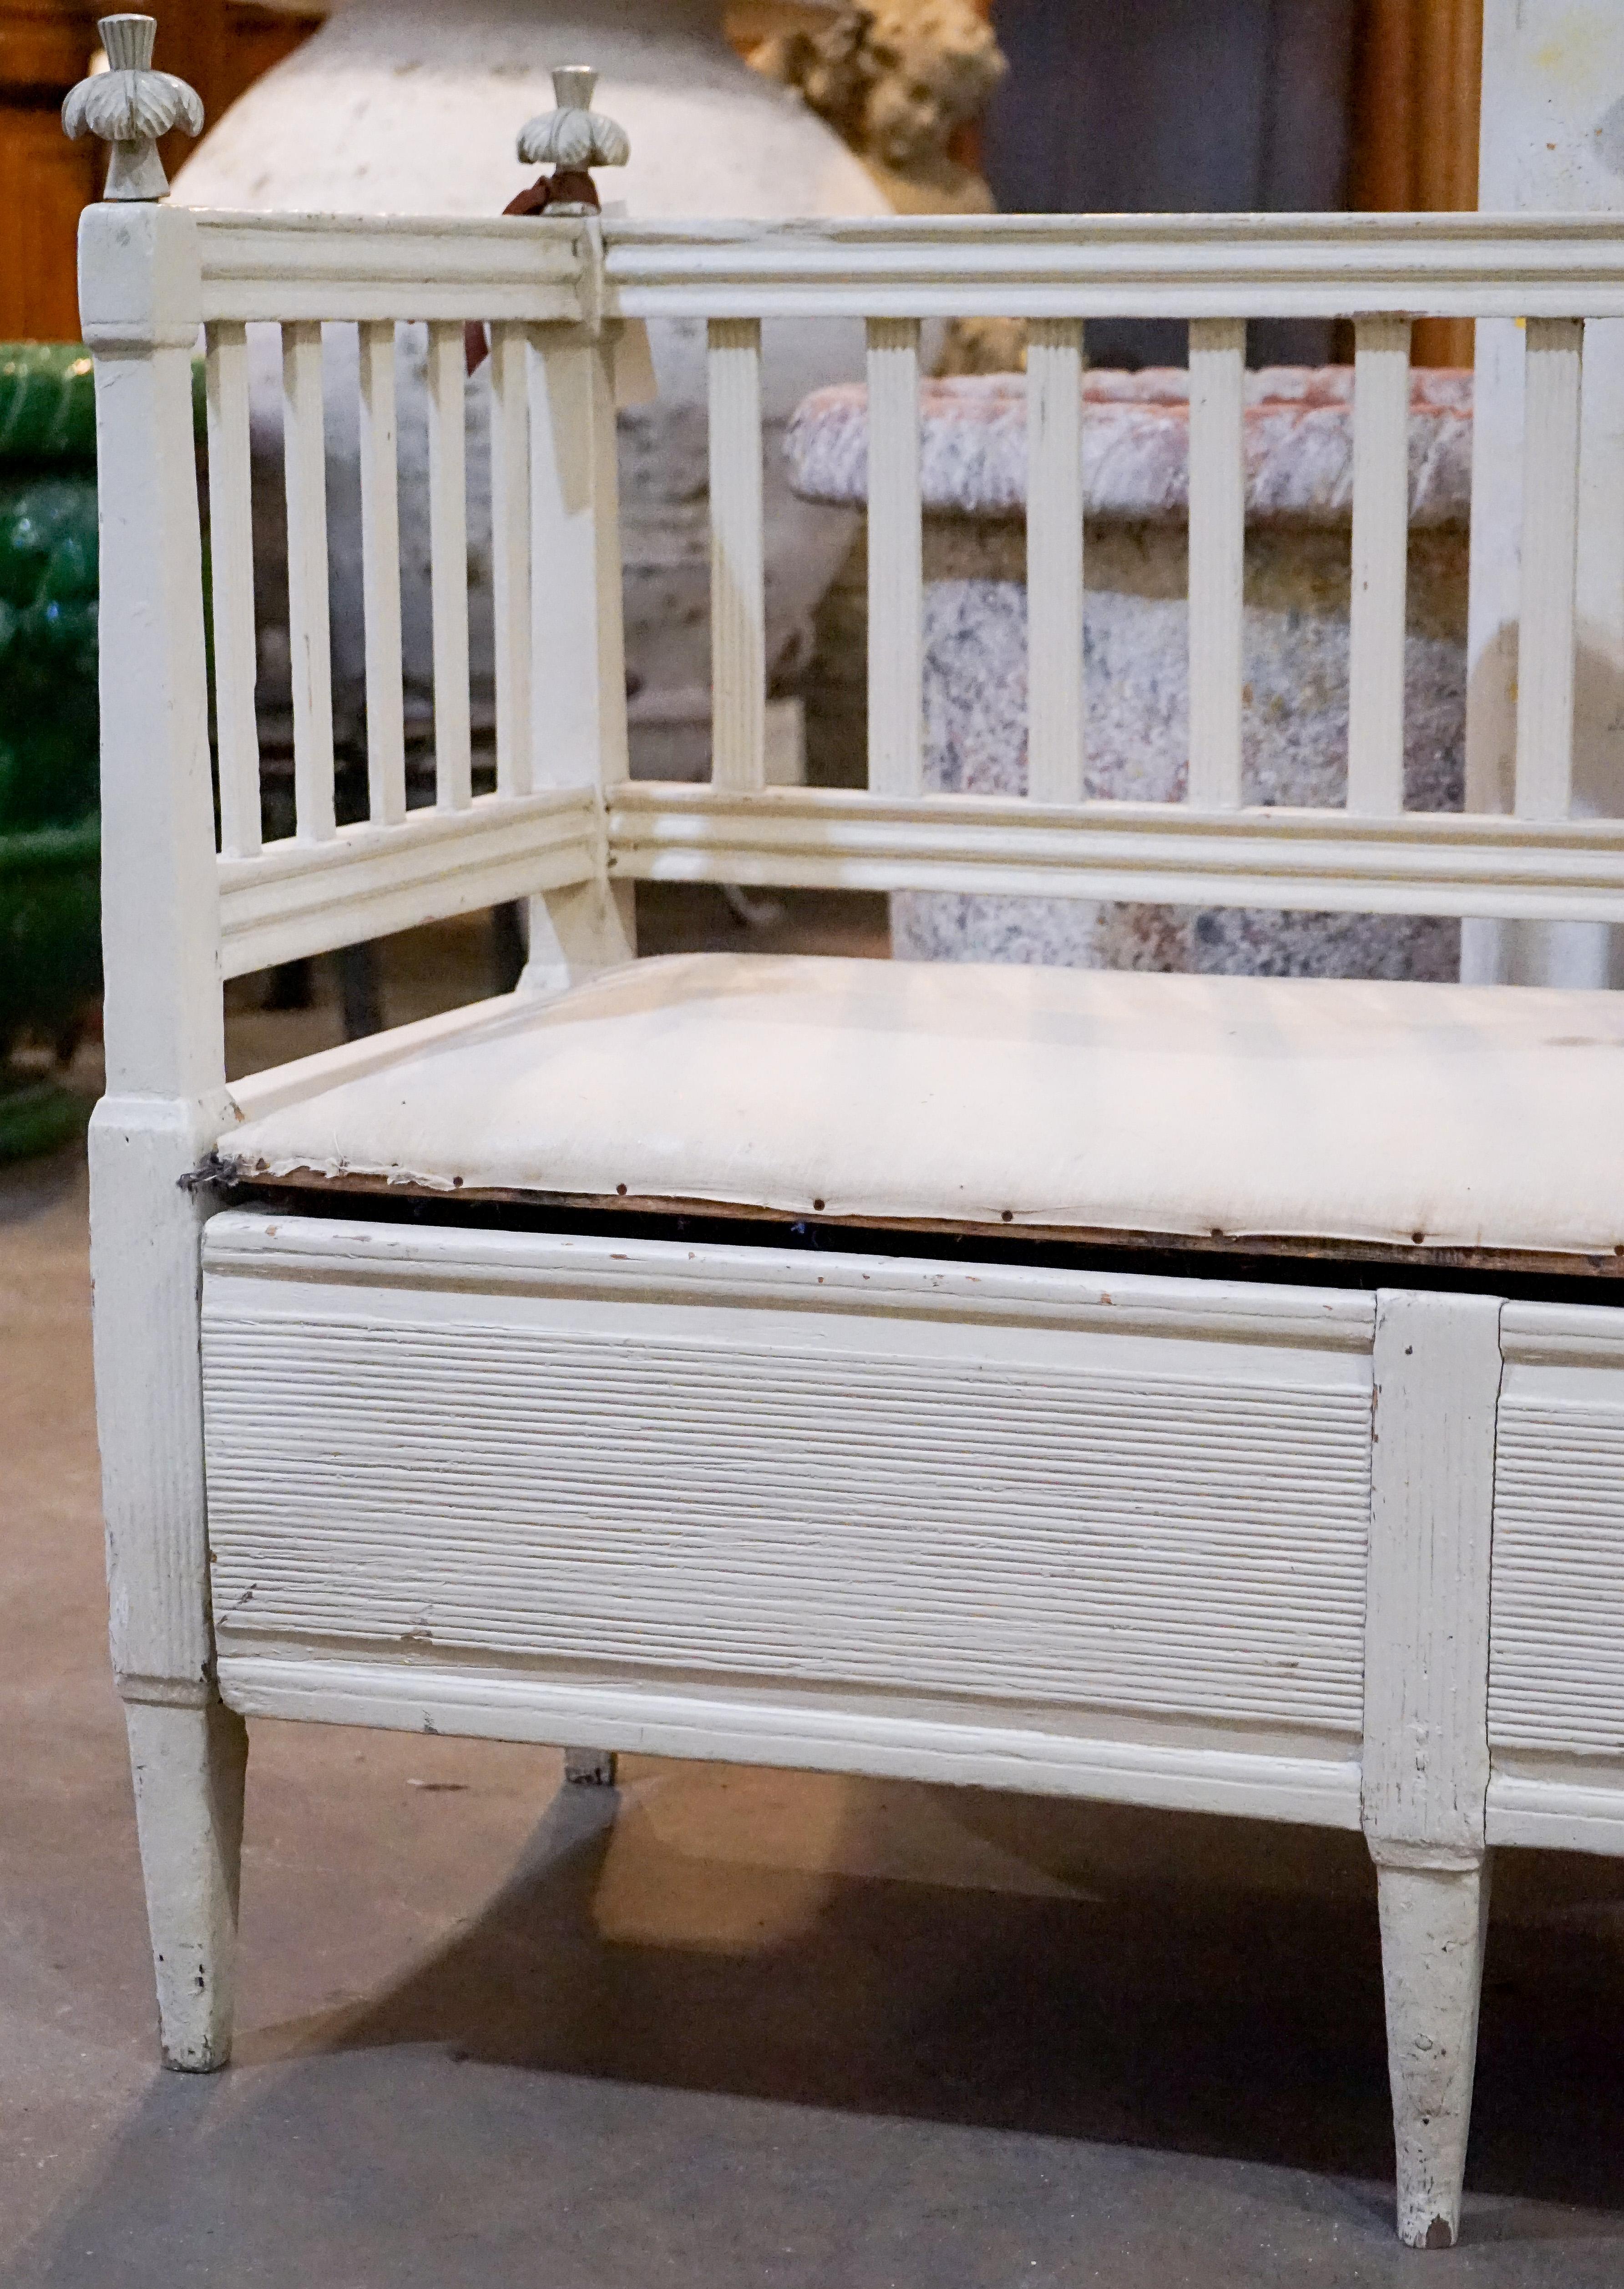 Swedish Gustavian bench coverts to double trundle bed. The original linen upholstered seat lifts to reveal an inner compartment that may be use as storage or, when the paneled front of the bench is pulled forward, space is made for a trundle bed.